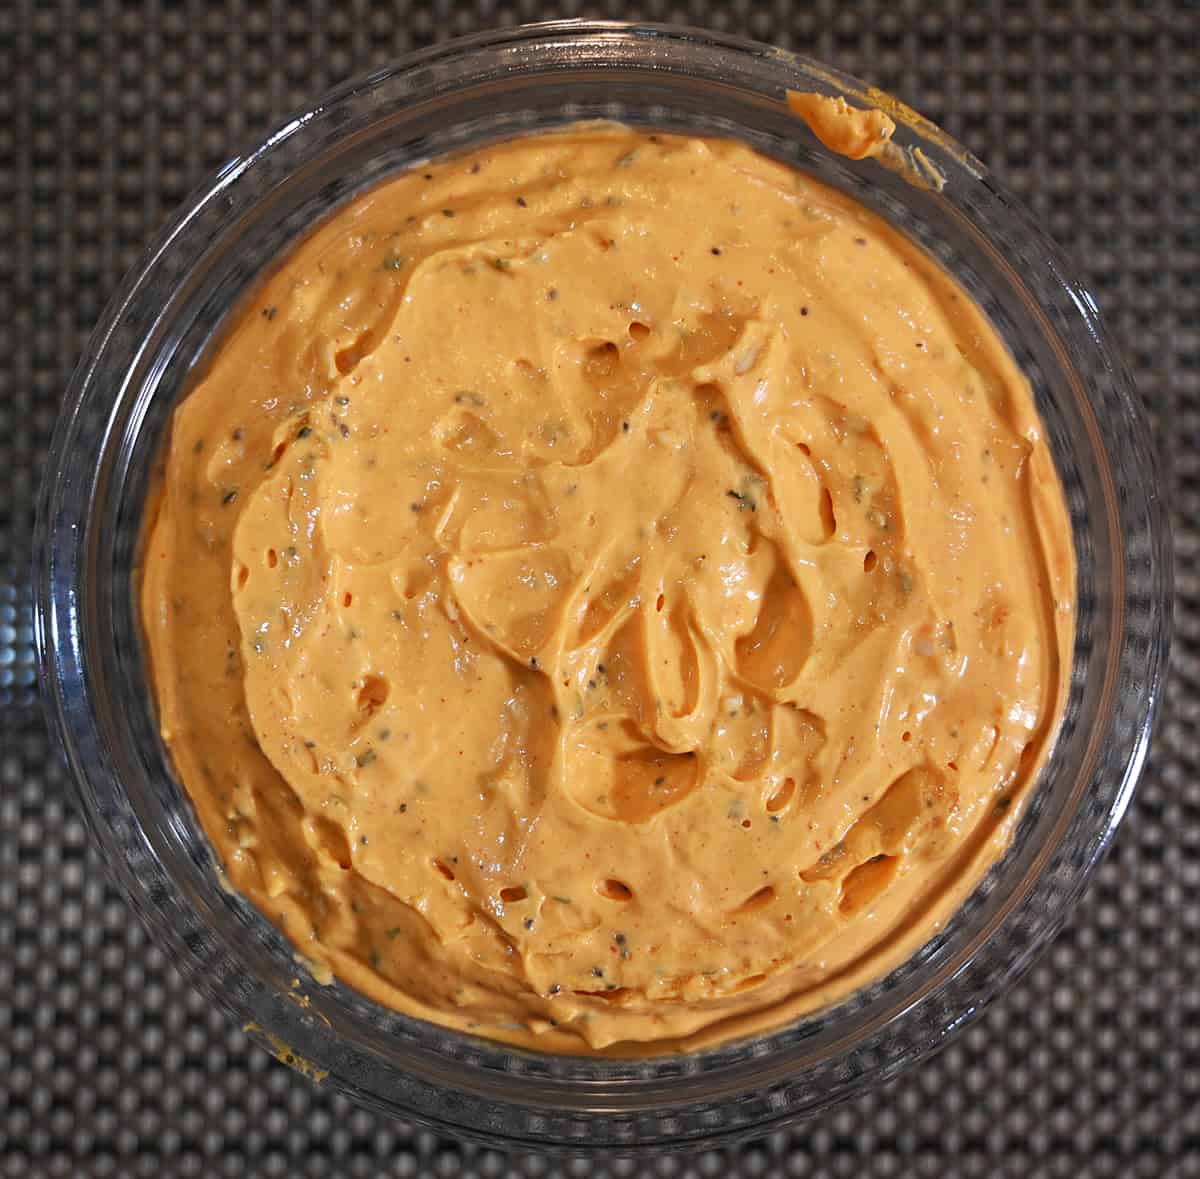 Top down image of the container of dip open so you can see what the dip looks like.